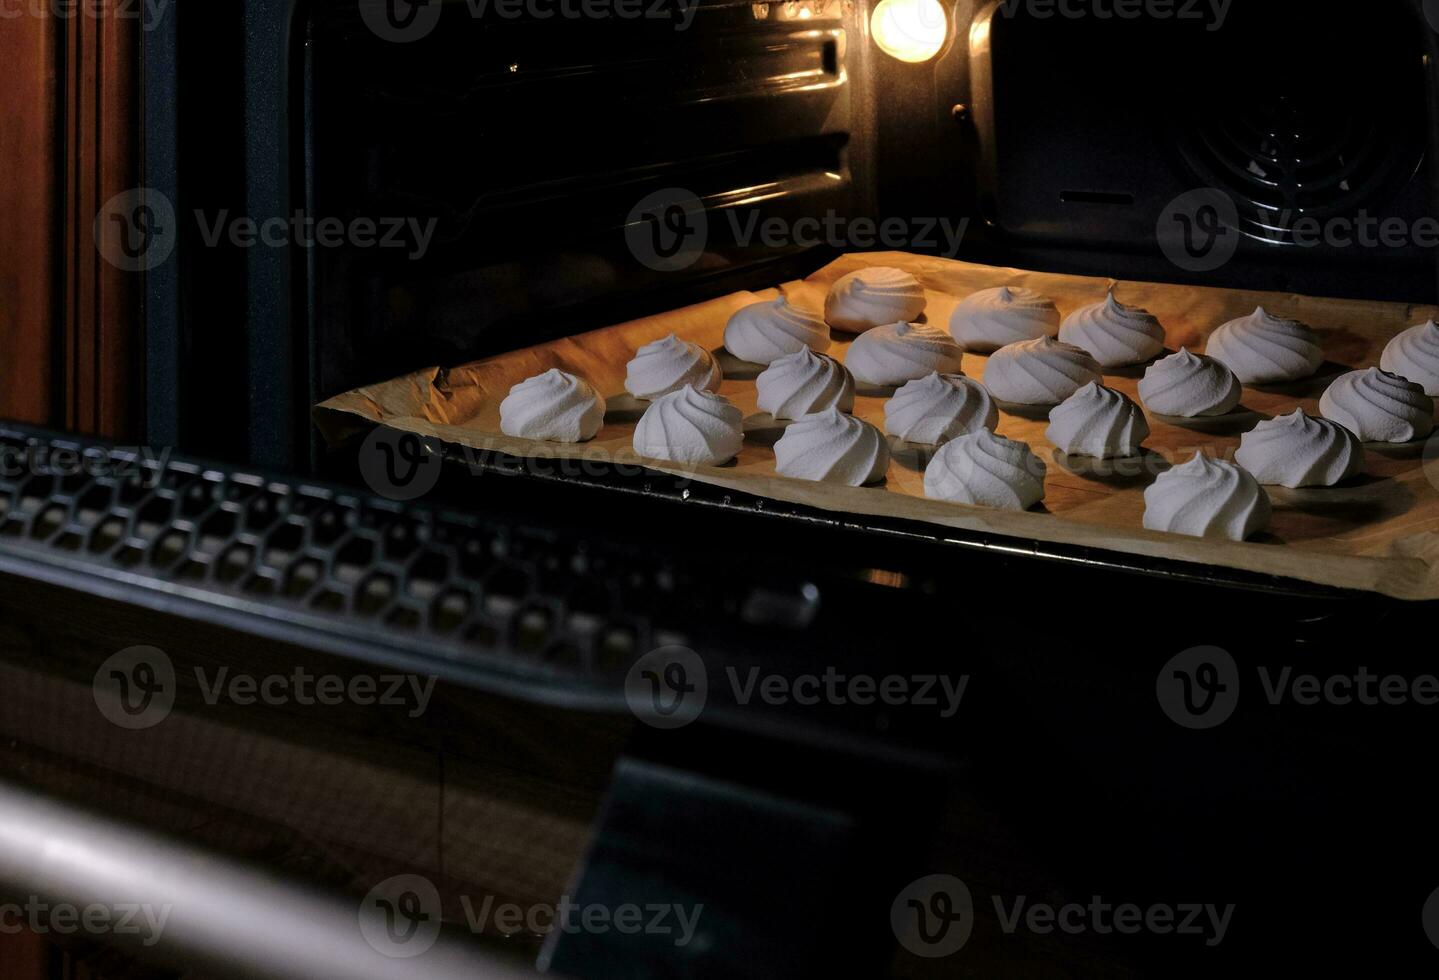 In the kitchen, white meringues are cooked on a baking sheet in the oven photo